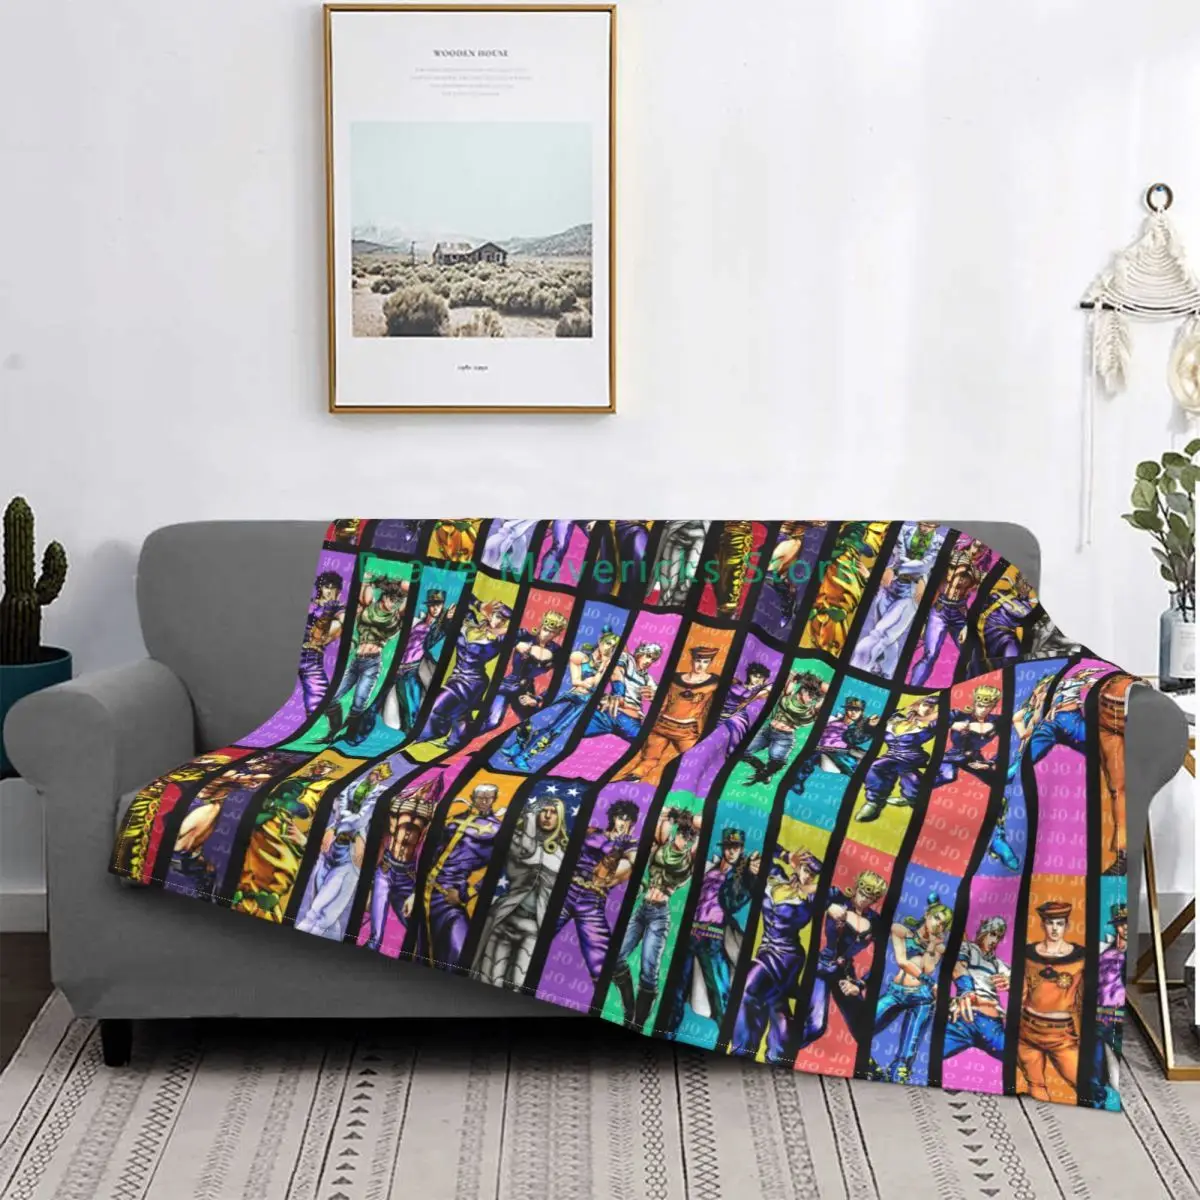 

A Couch Decor Jojo JoJos Bizarre Adventure Blanket Gifts For Kids Cozy Micro Flannel Fleece Blankets and Throws